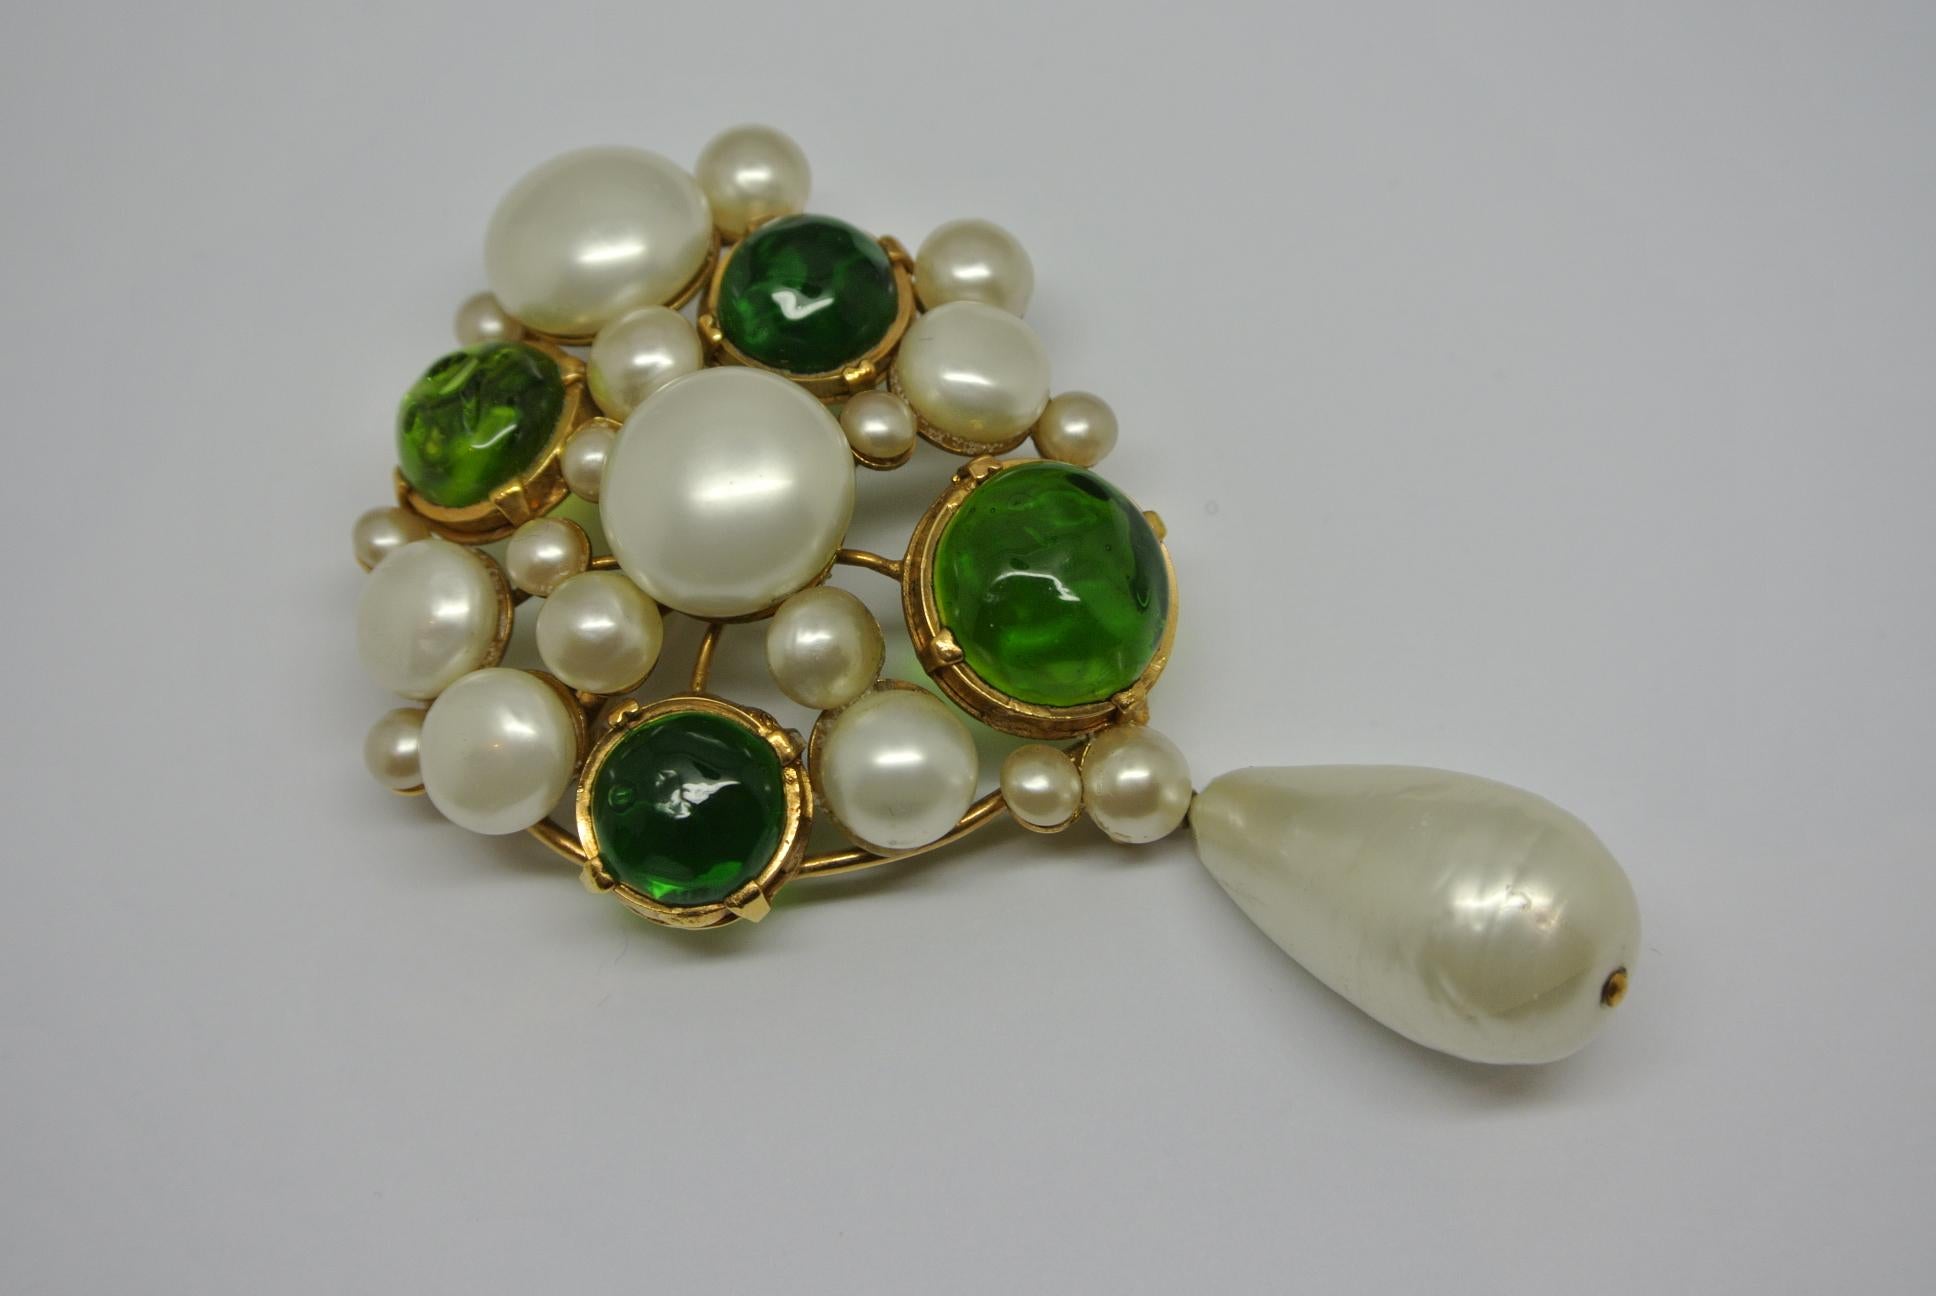 A Chanel signed brooch, dated 1970s. 
comes with green glasses and faux irregular pearls, specially made by Gripoix workshop. Structural shape with large pearl drop. Can be worn as a brooch or a pendant. 